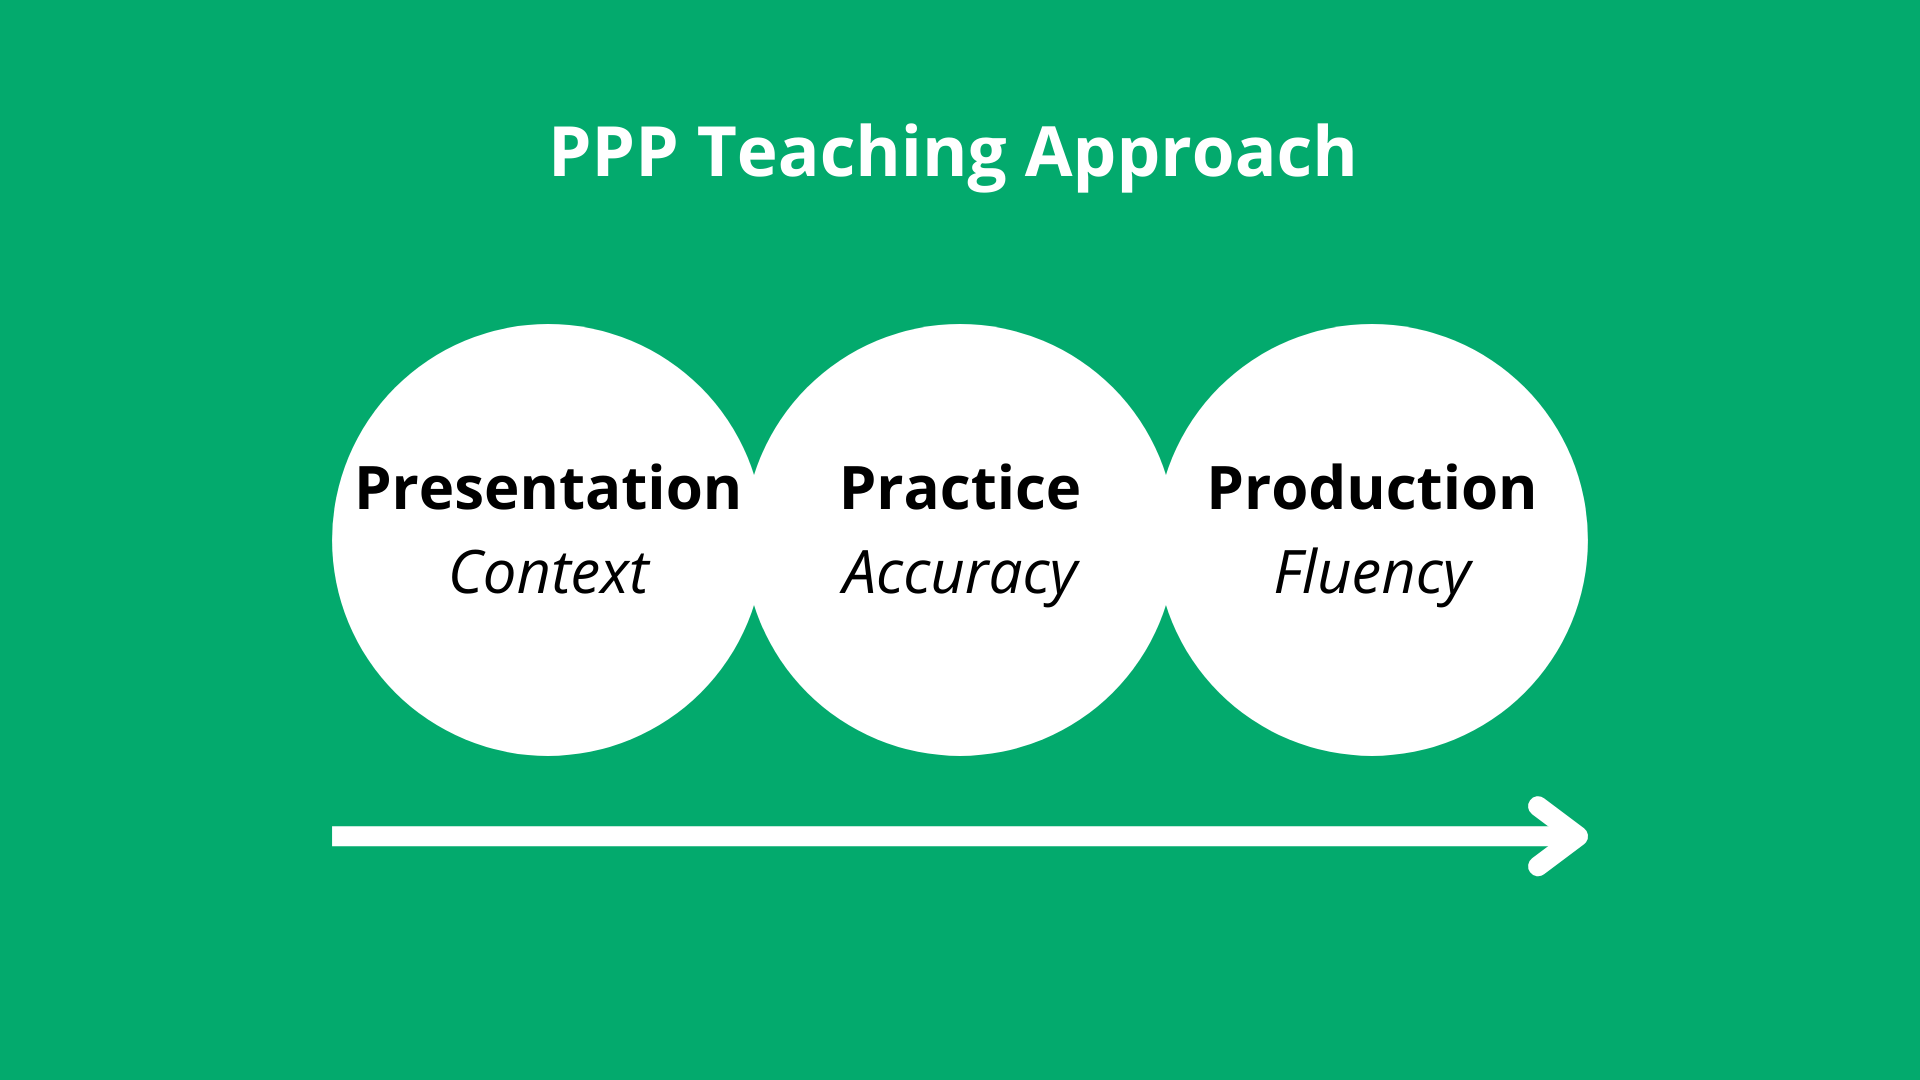 PPP teaching approach lesson structure